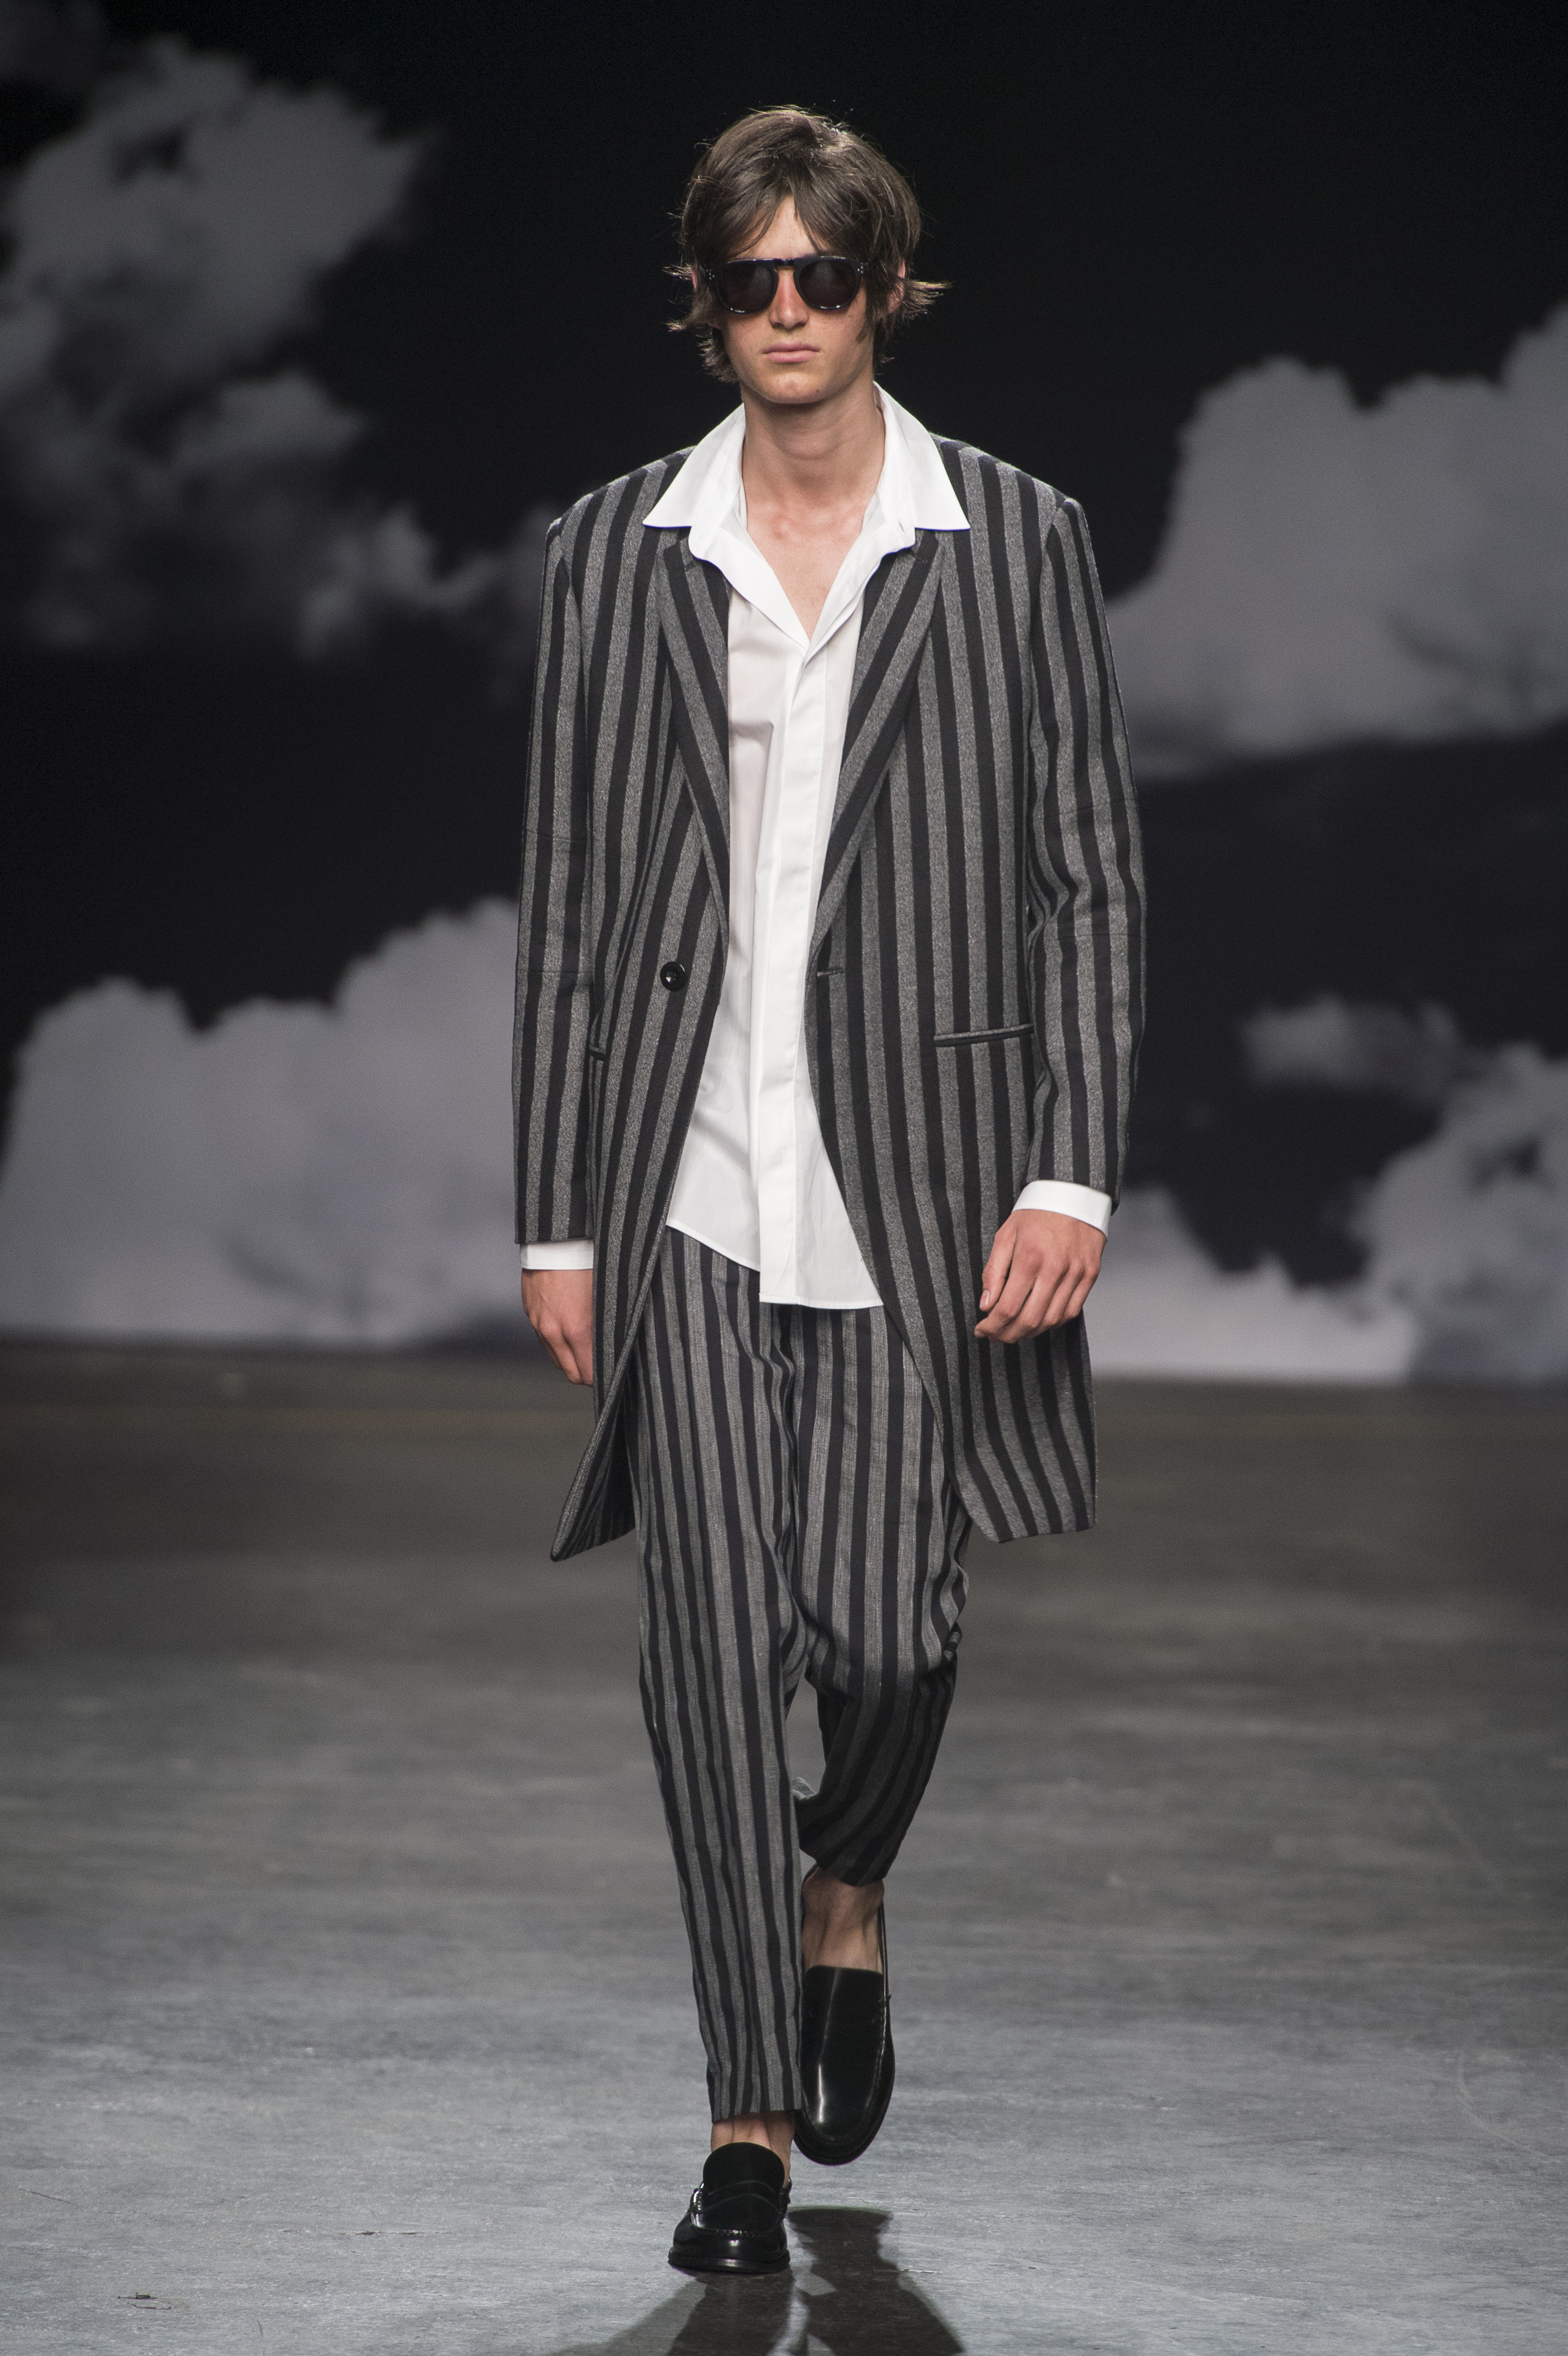 Tiger of Sweden Menswear Fashion Show, Collection Fall Winter 2016  presented during London Fashion Week, runway look #010 – NOWFASHION